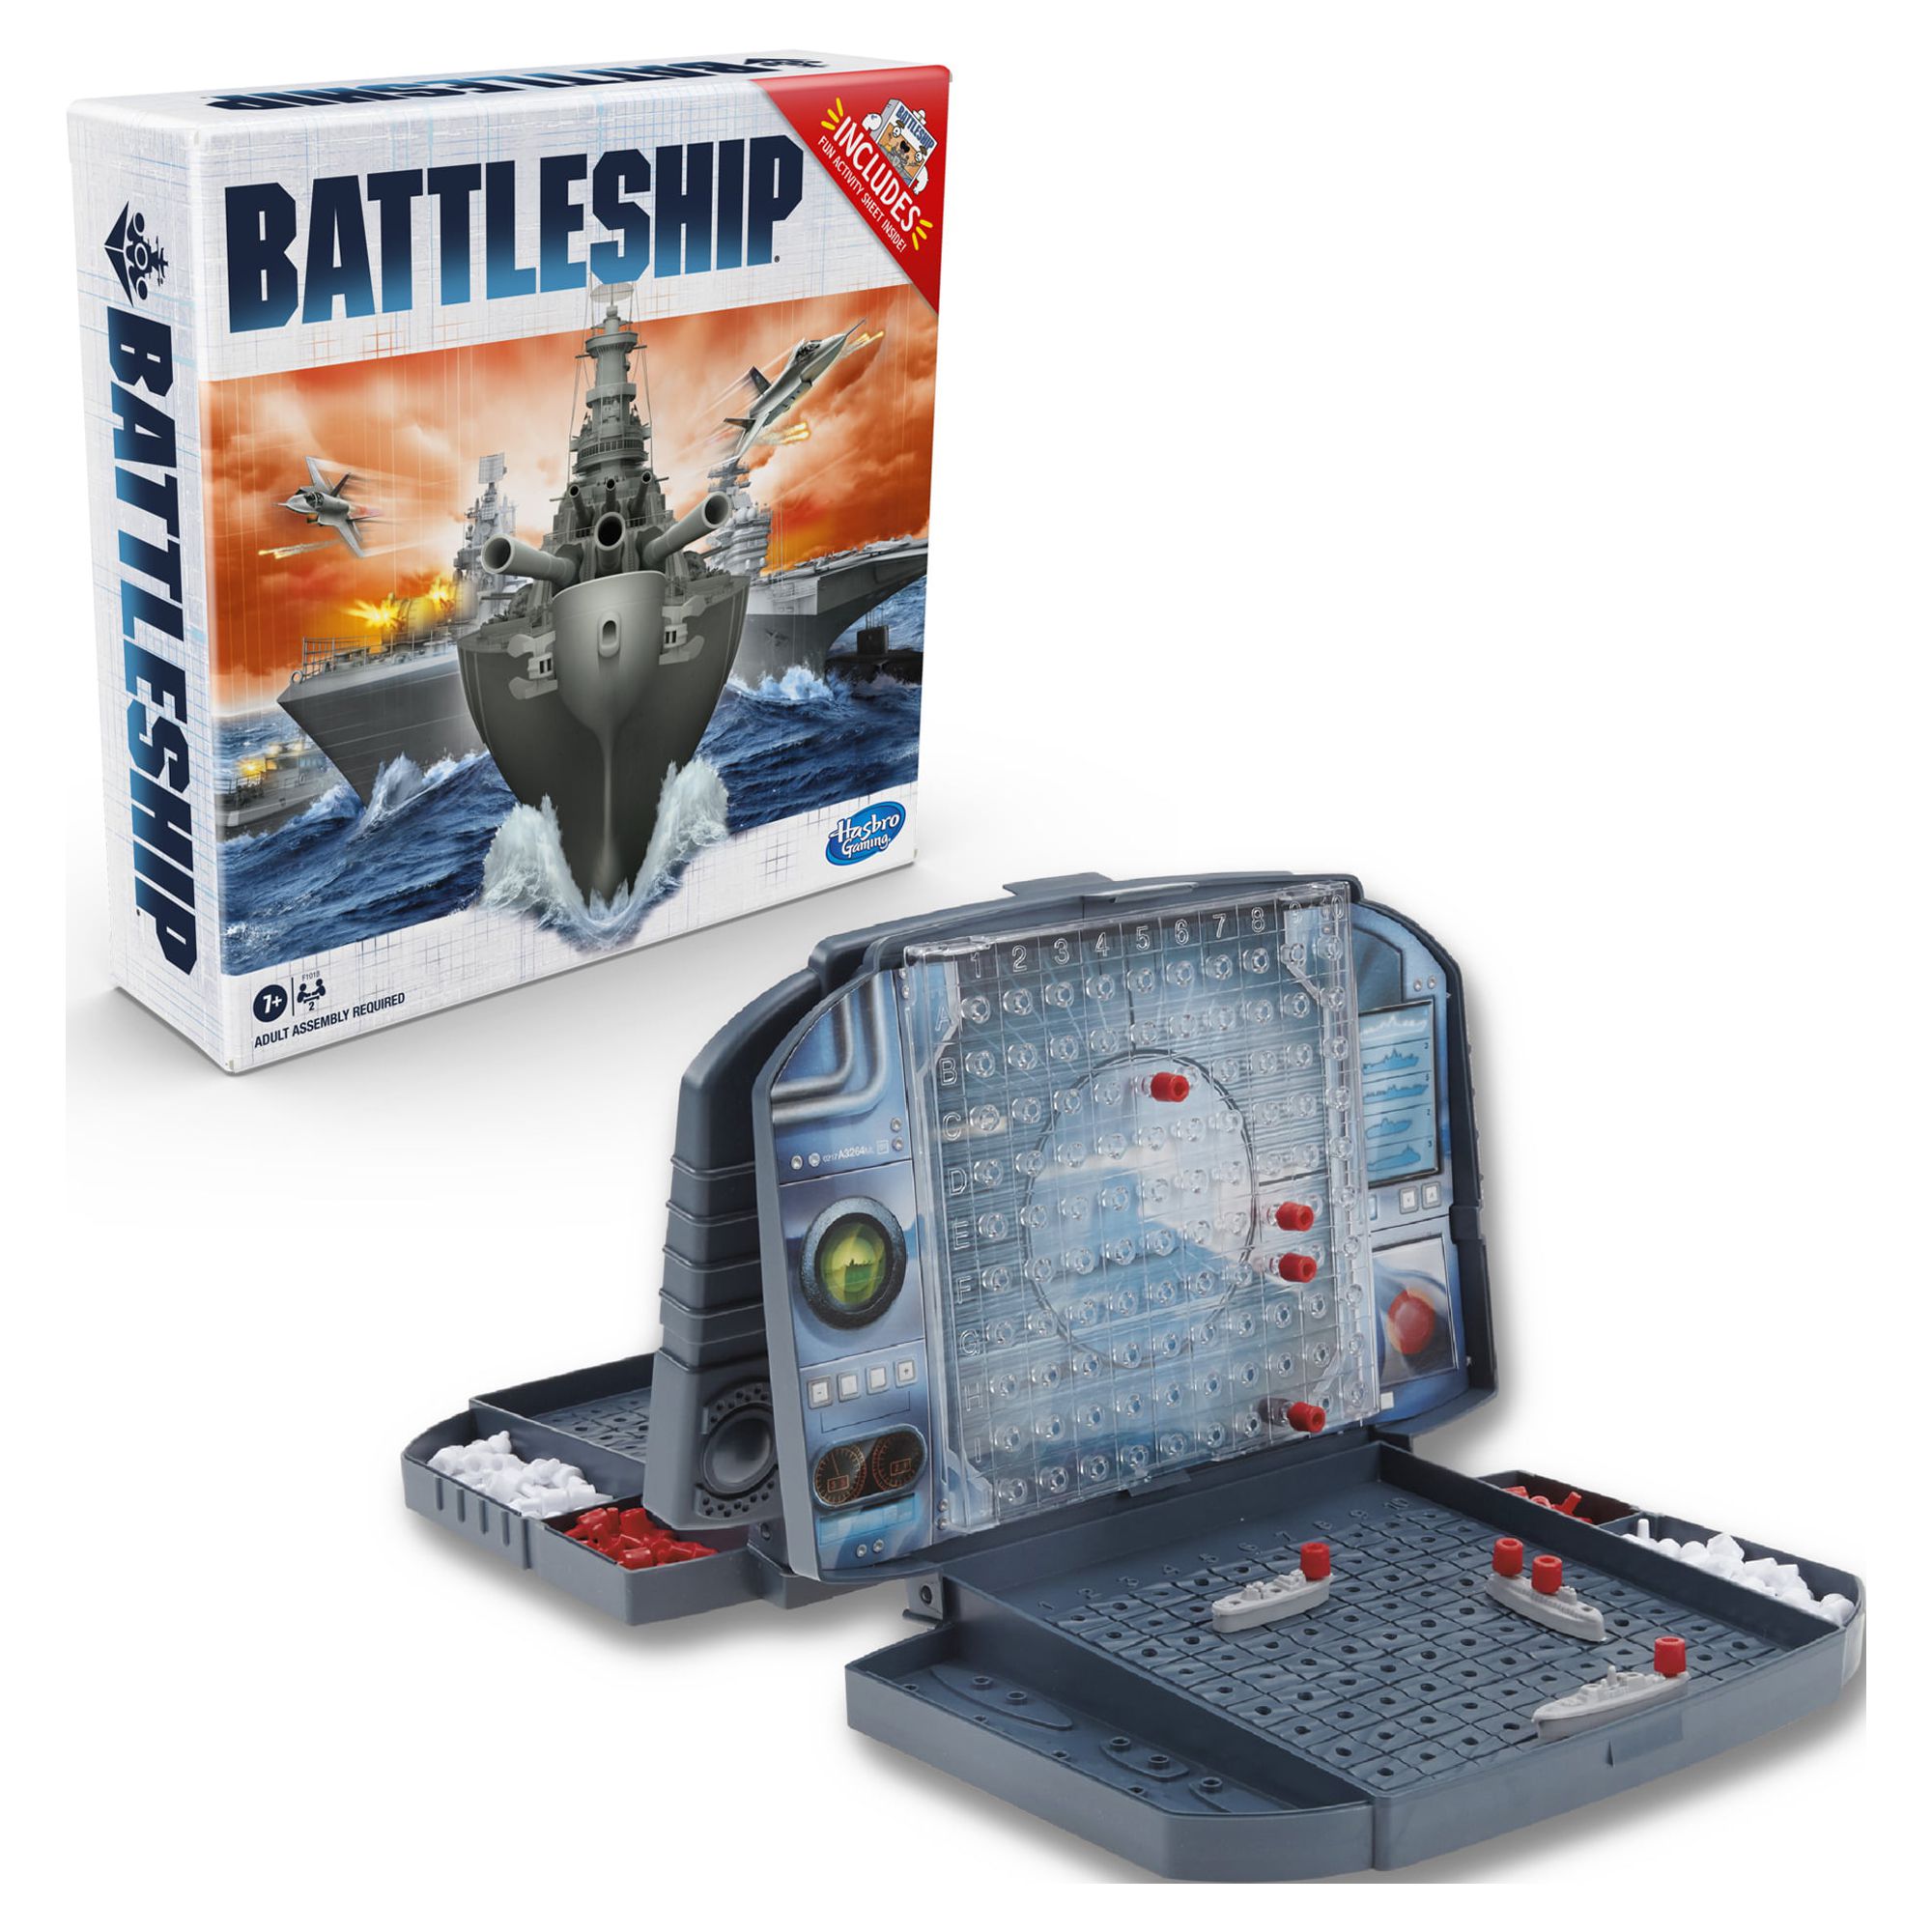 Battleship The Classic Naval Combat Board Game for Kids and Family Ages 7 and Up, 2 Players - image 3 of 6